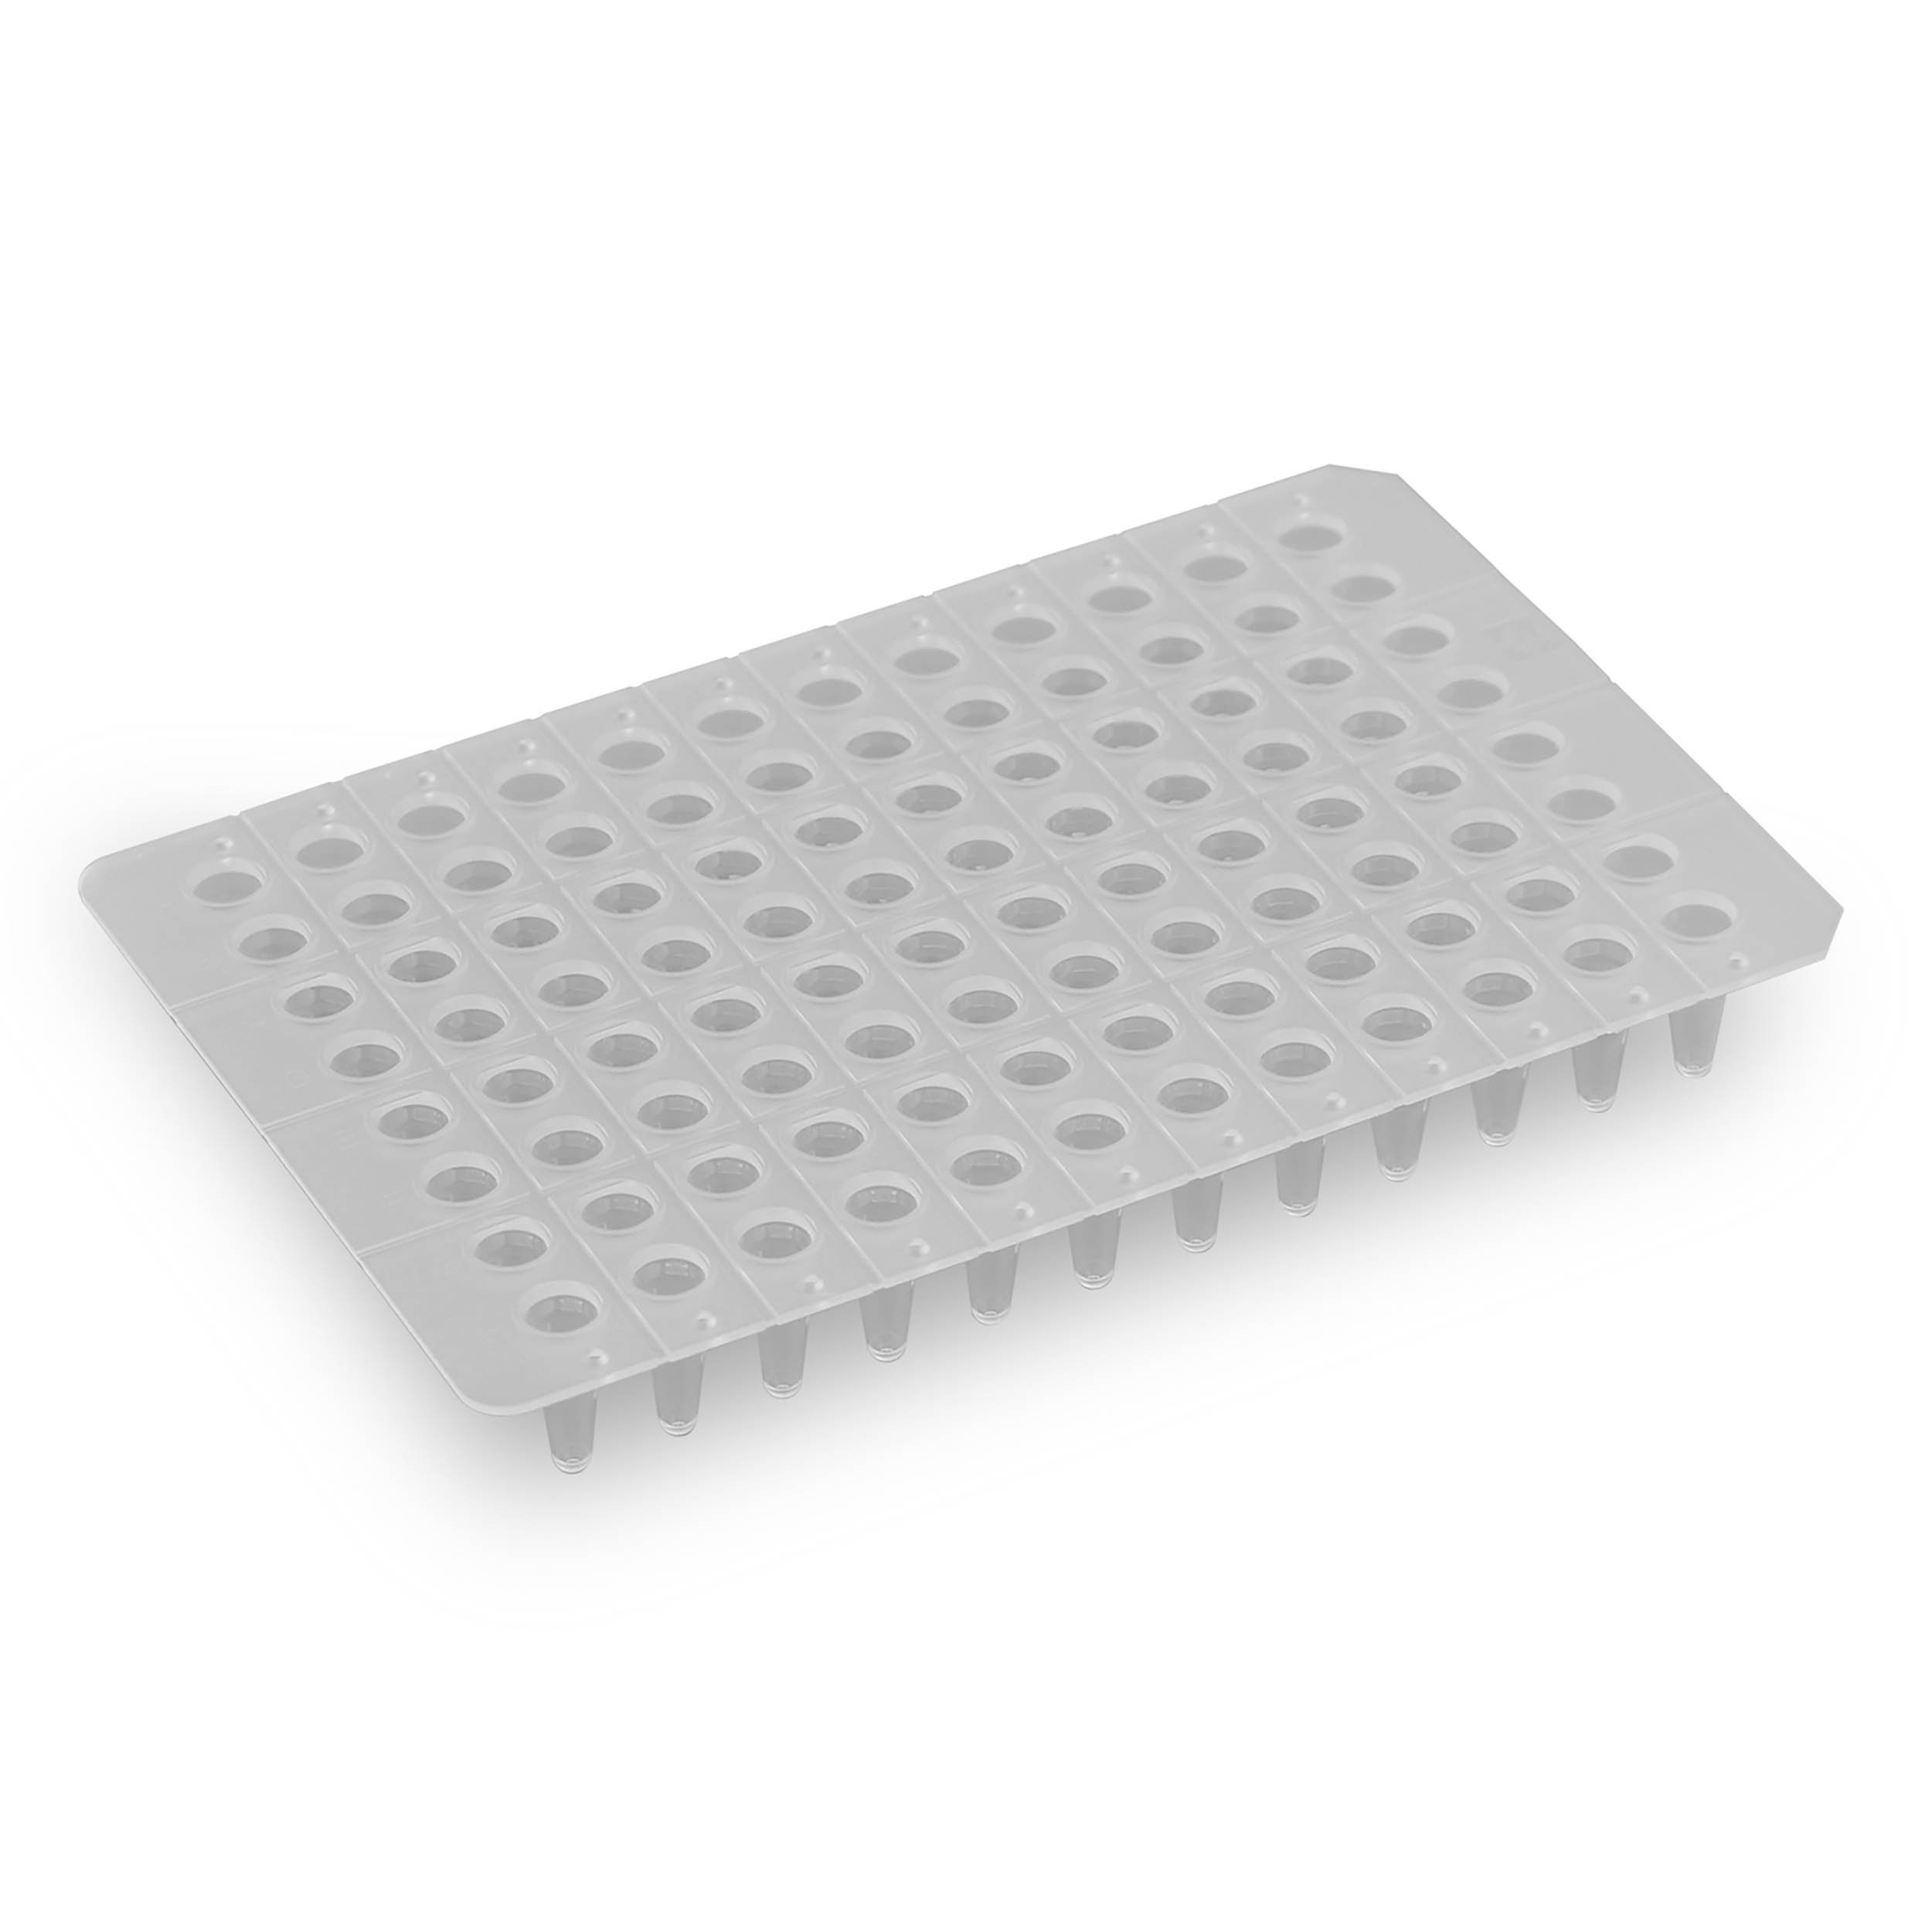 PureAmp Low Profile/Fast 96-Well x 0.1mL PCR Plates - Non-Skirted, Natural (10 Packs of 50 per Pack)